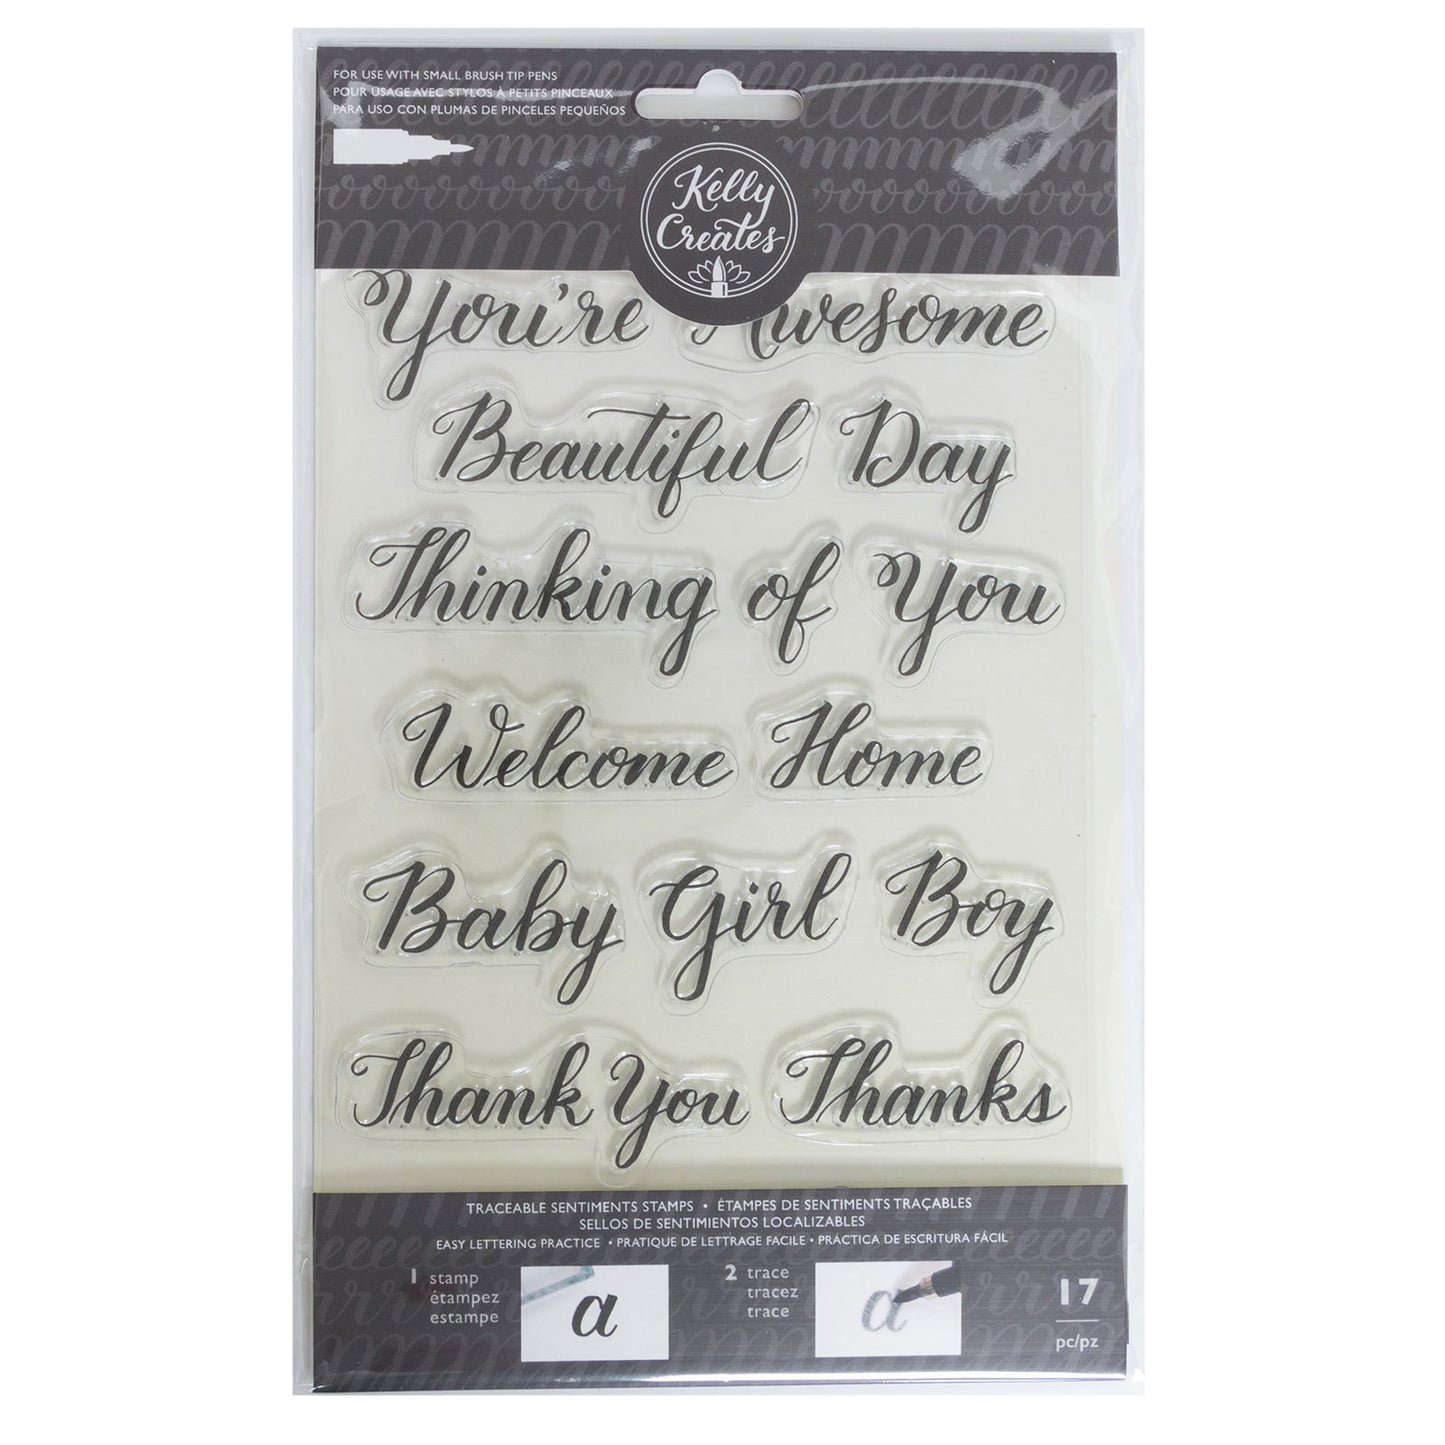 Kelly Creates Acrylic Traceable Stamps-Sentiment